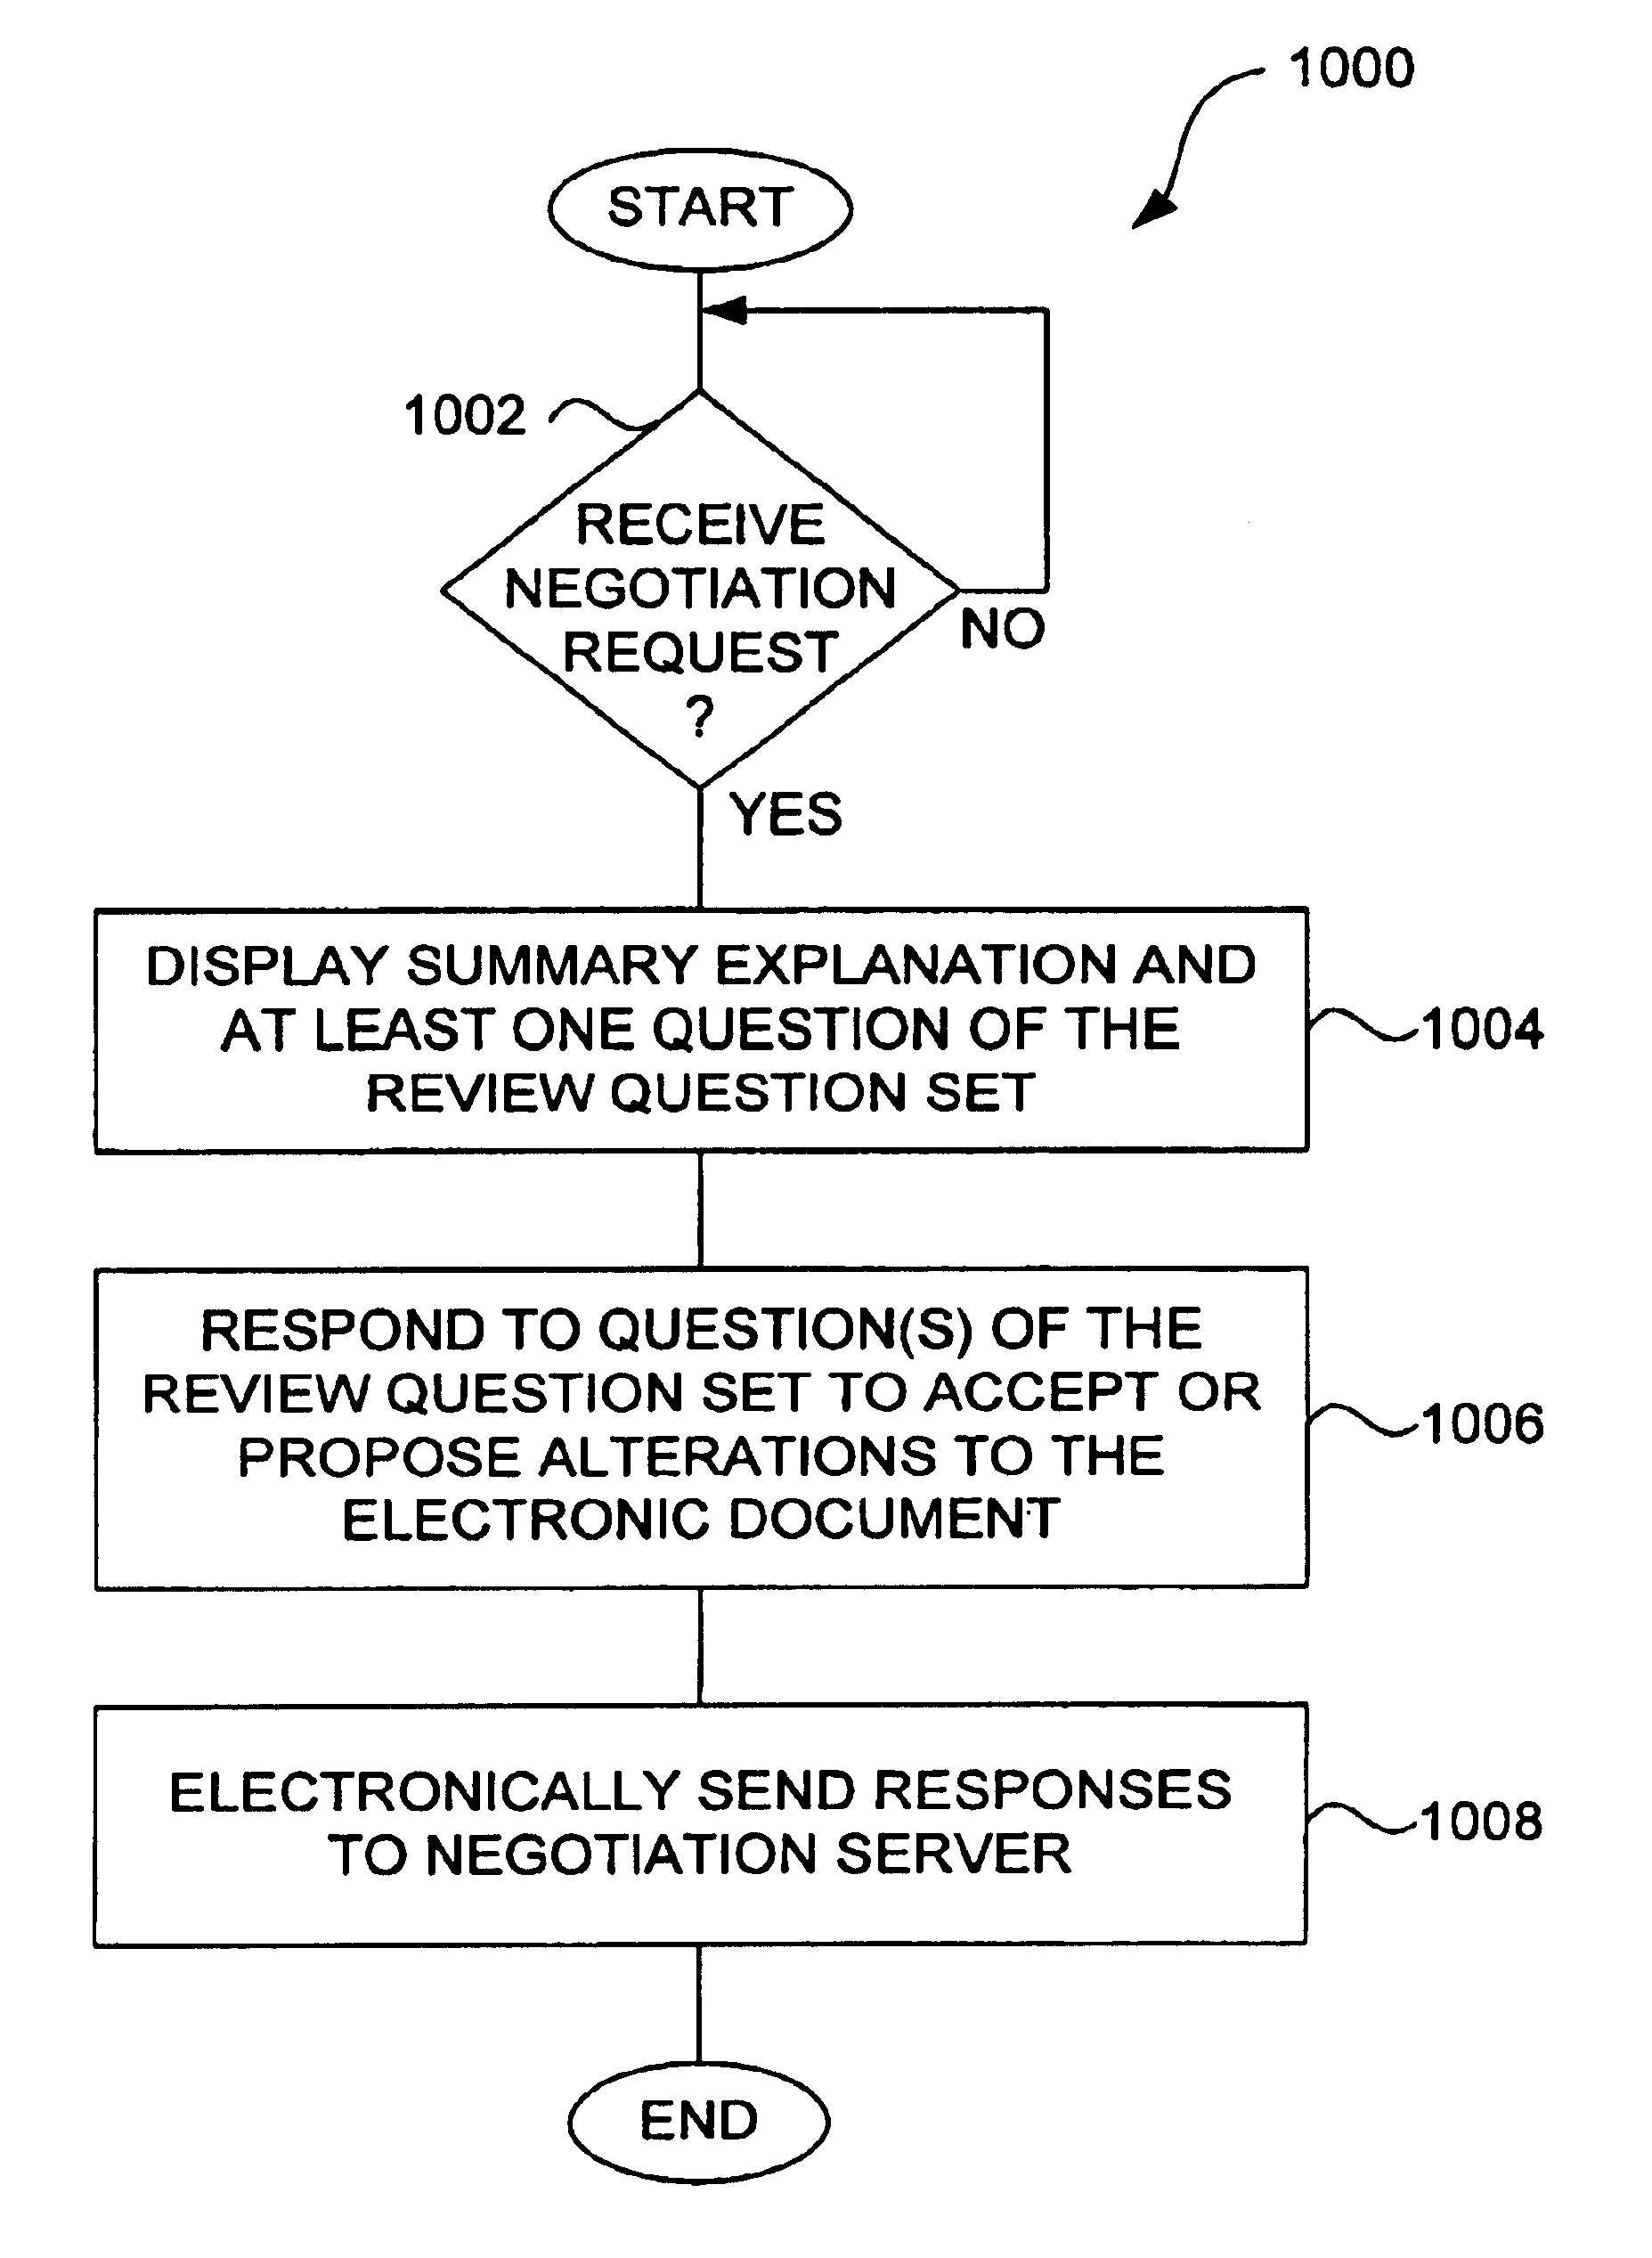 Method and system for automated document generation